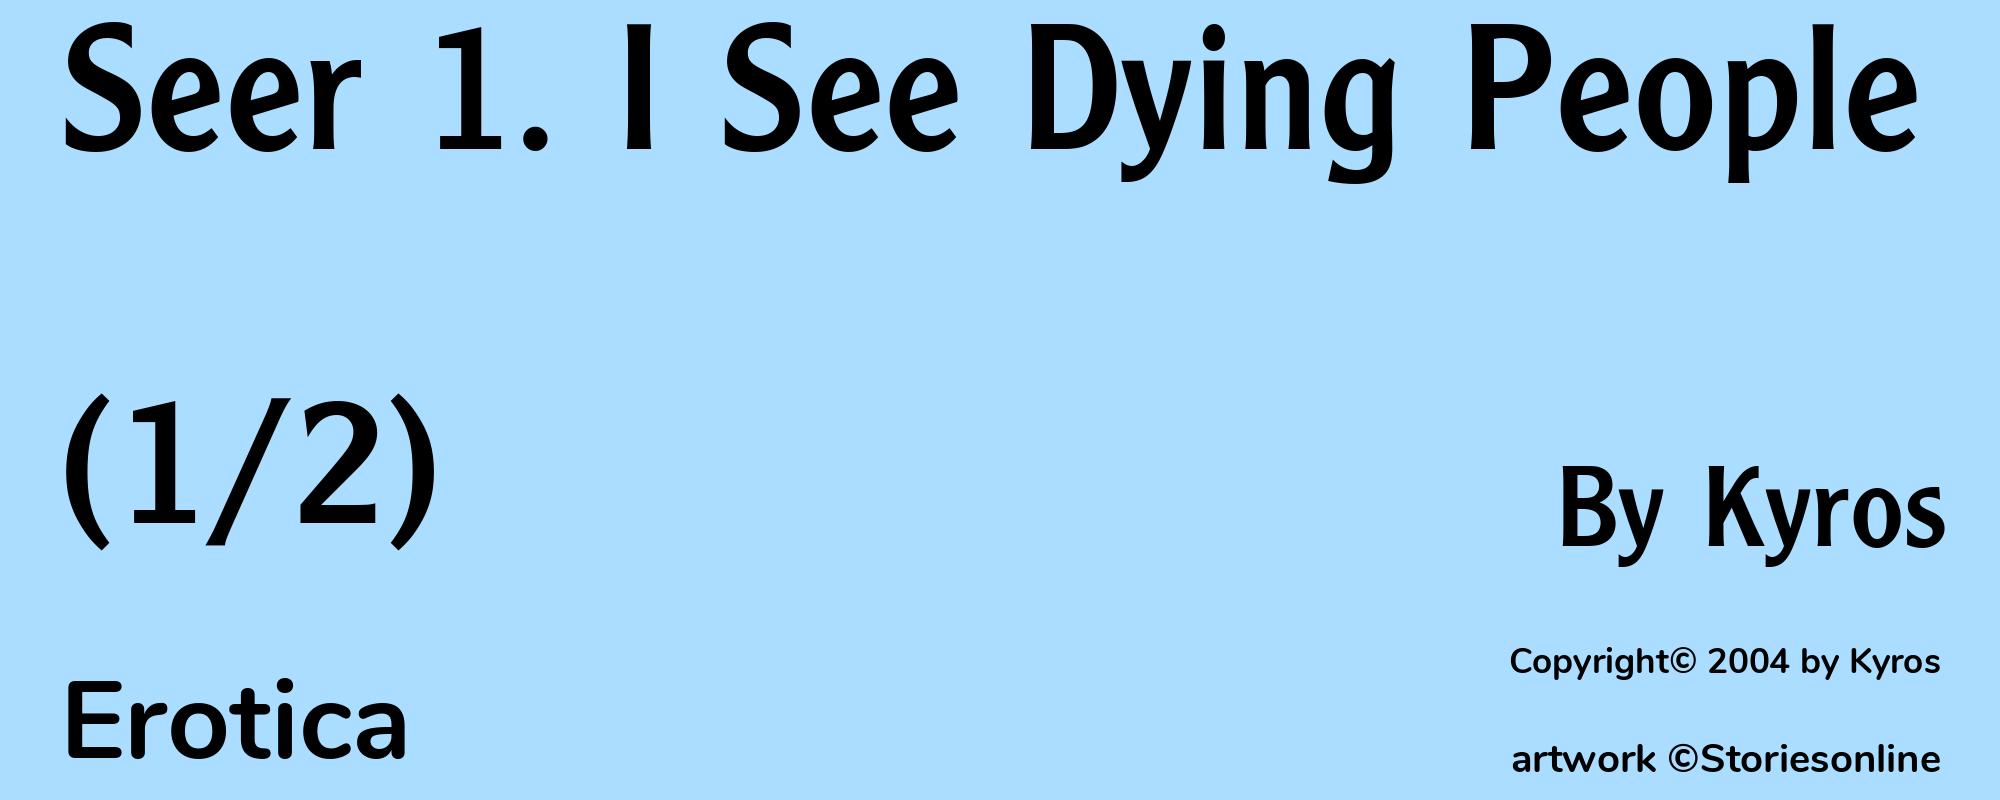 Seer 1. I See Dying People (1/2) - Cover